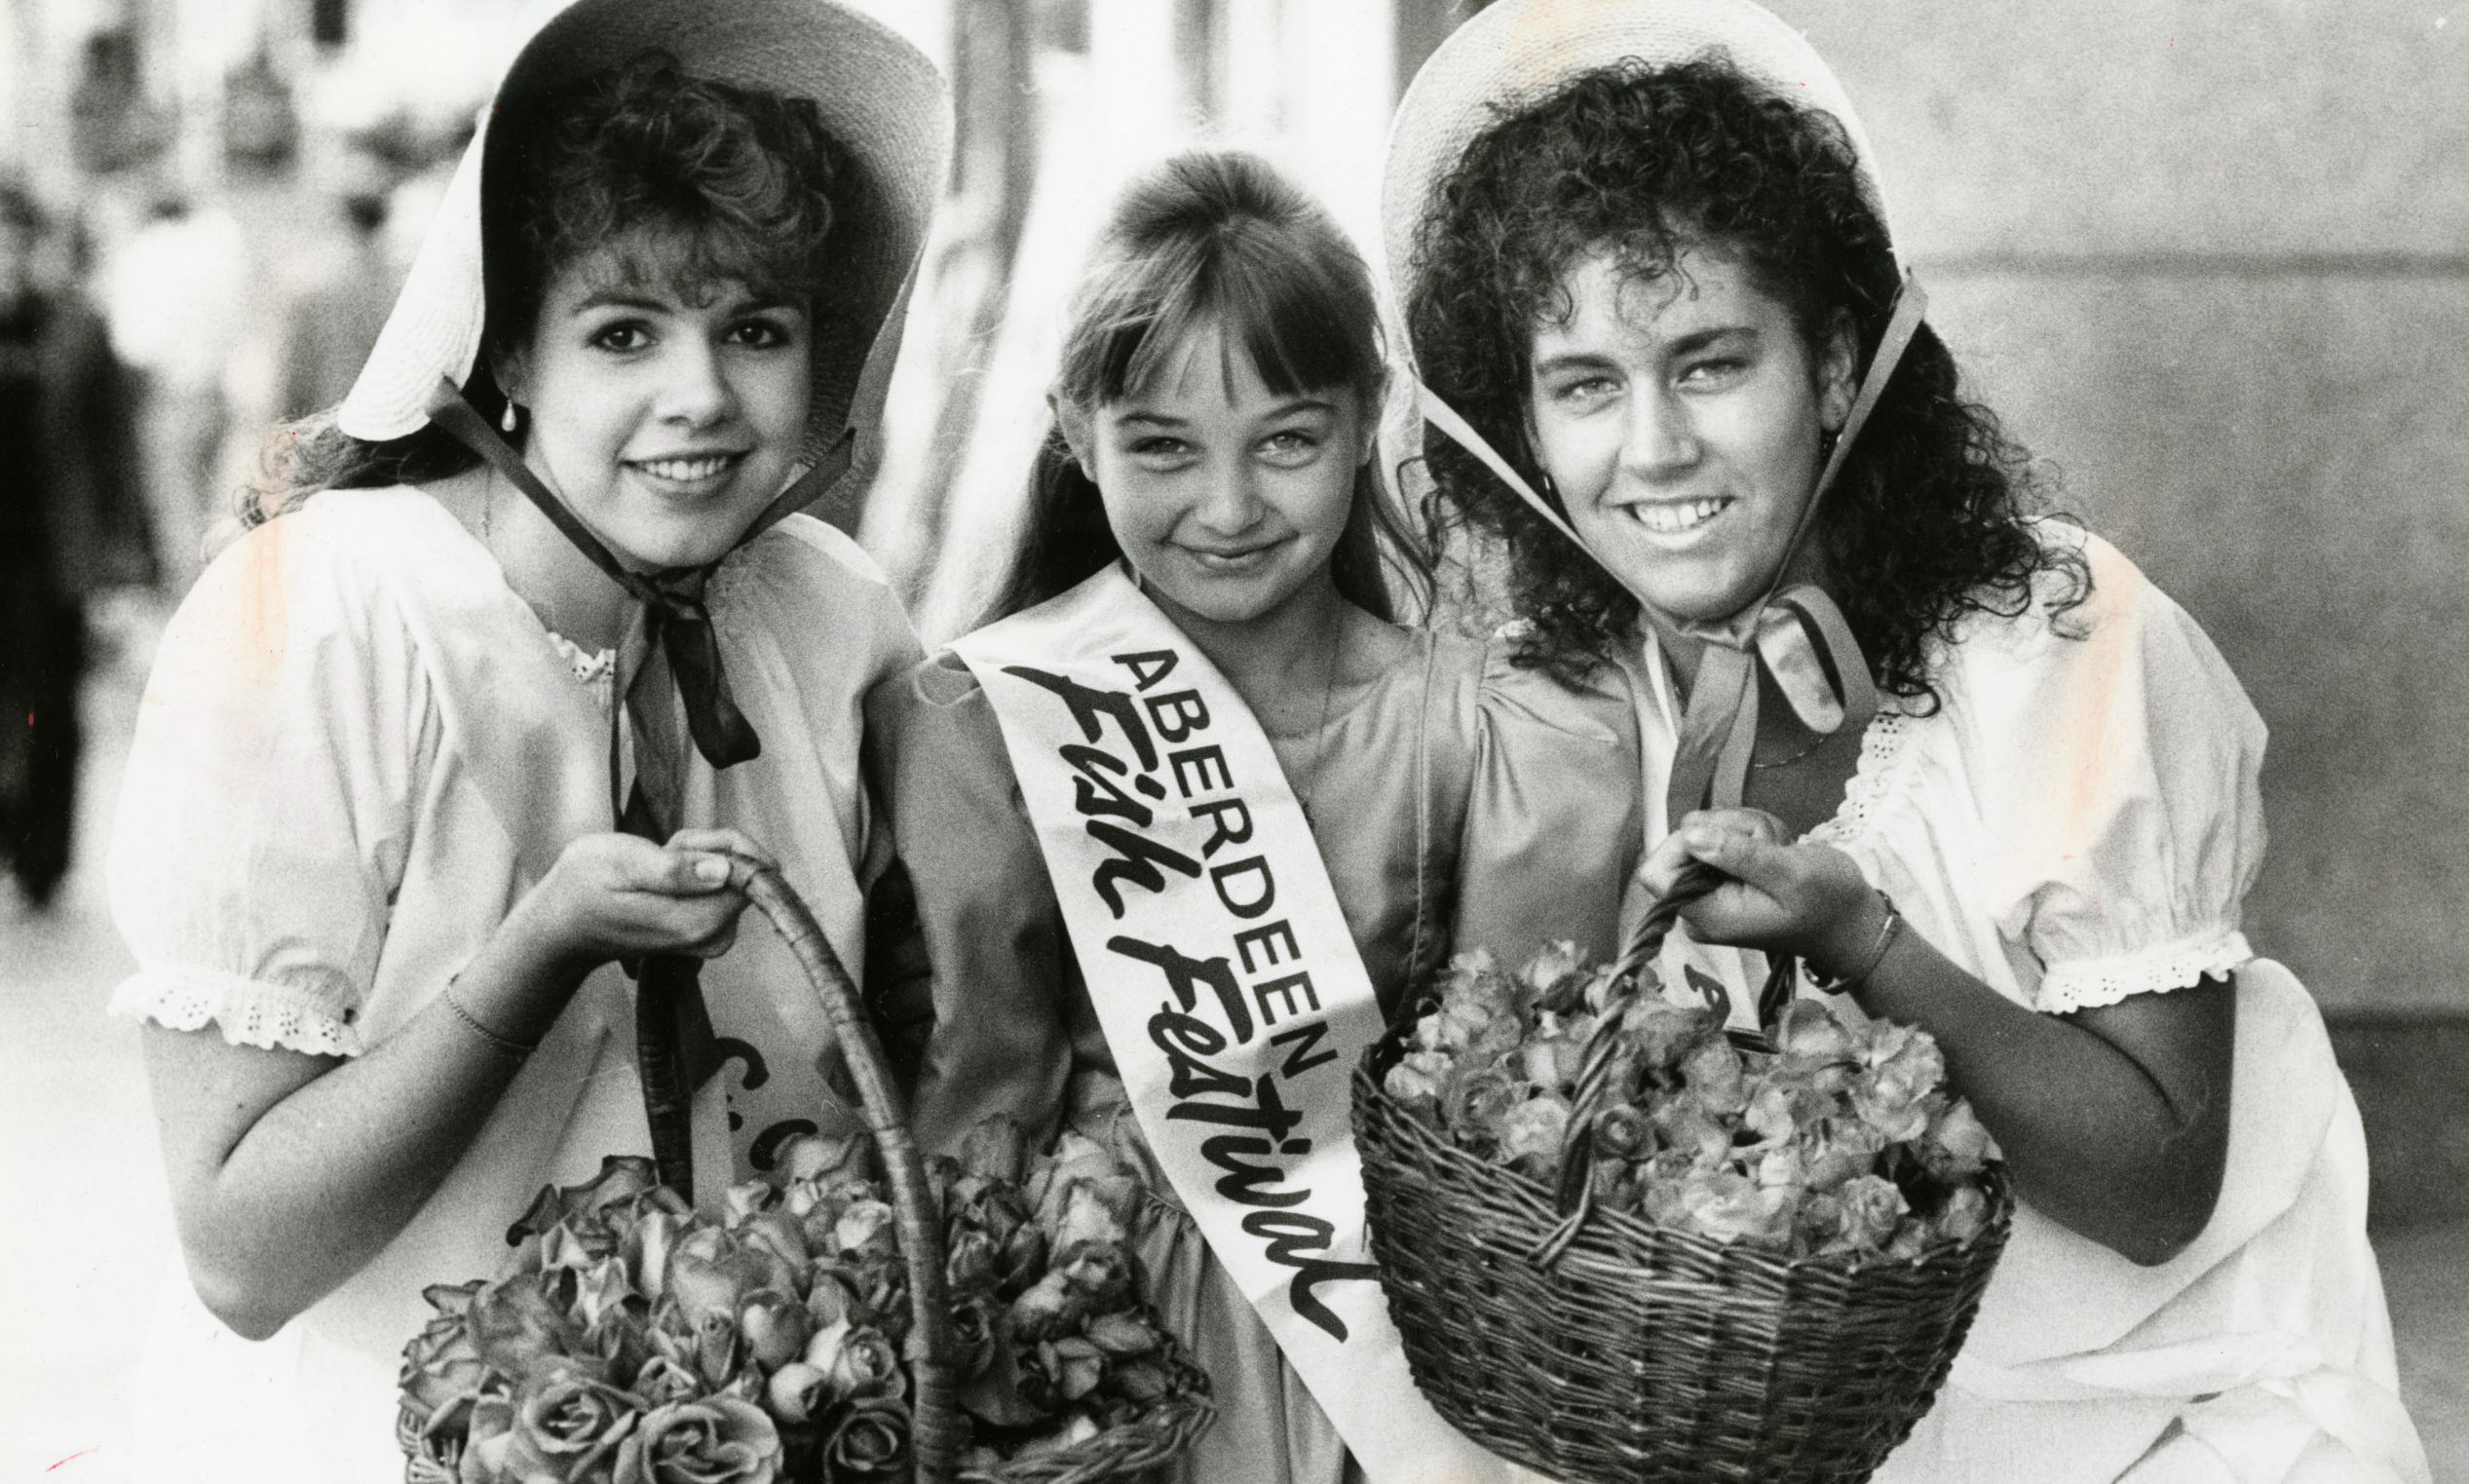 Young women wearing bonnets and carrying baskets of roses for the Aberdeen Rose Festival